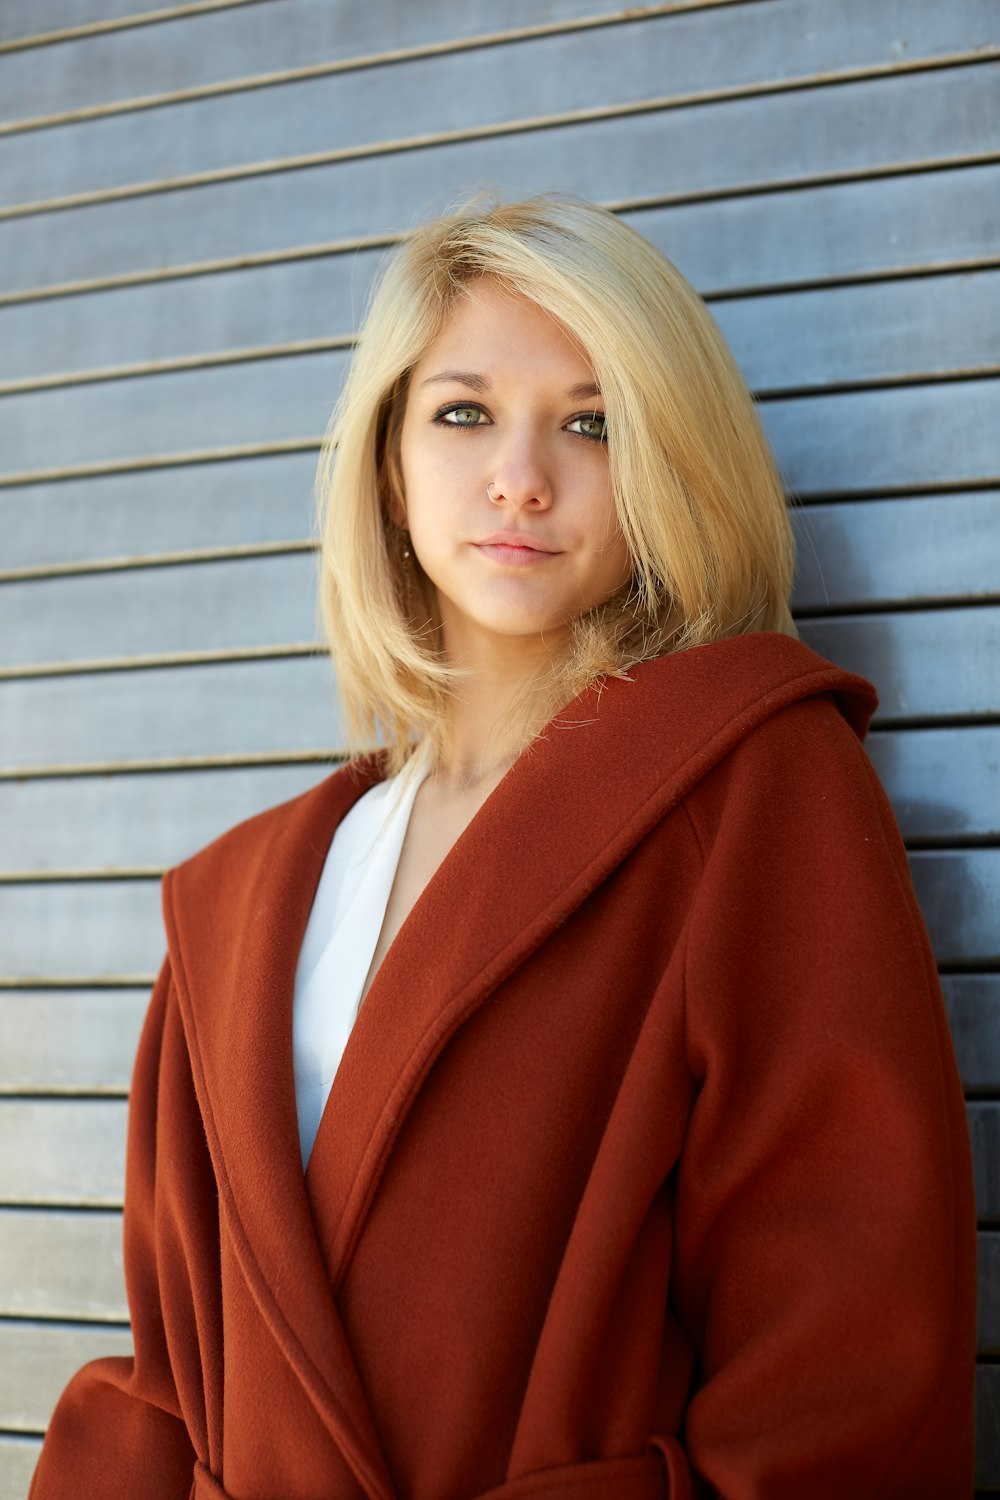 woman in red blazer standing near brown wooden wall